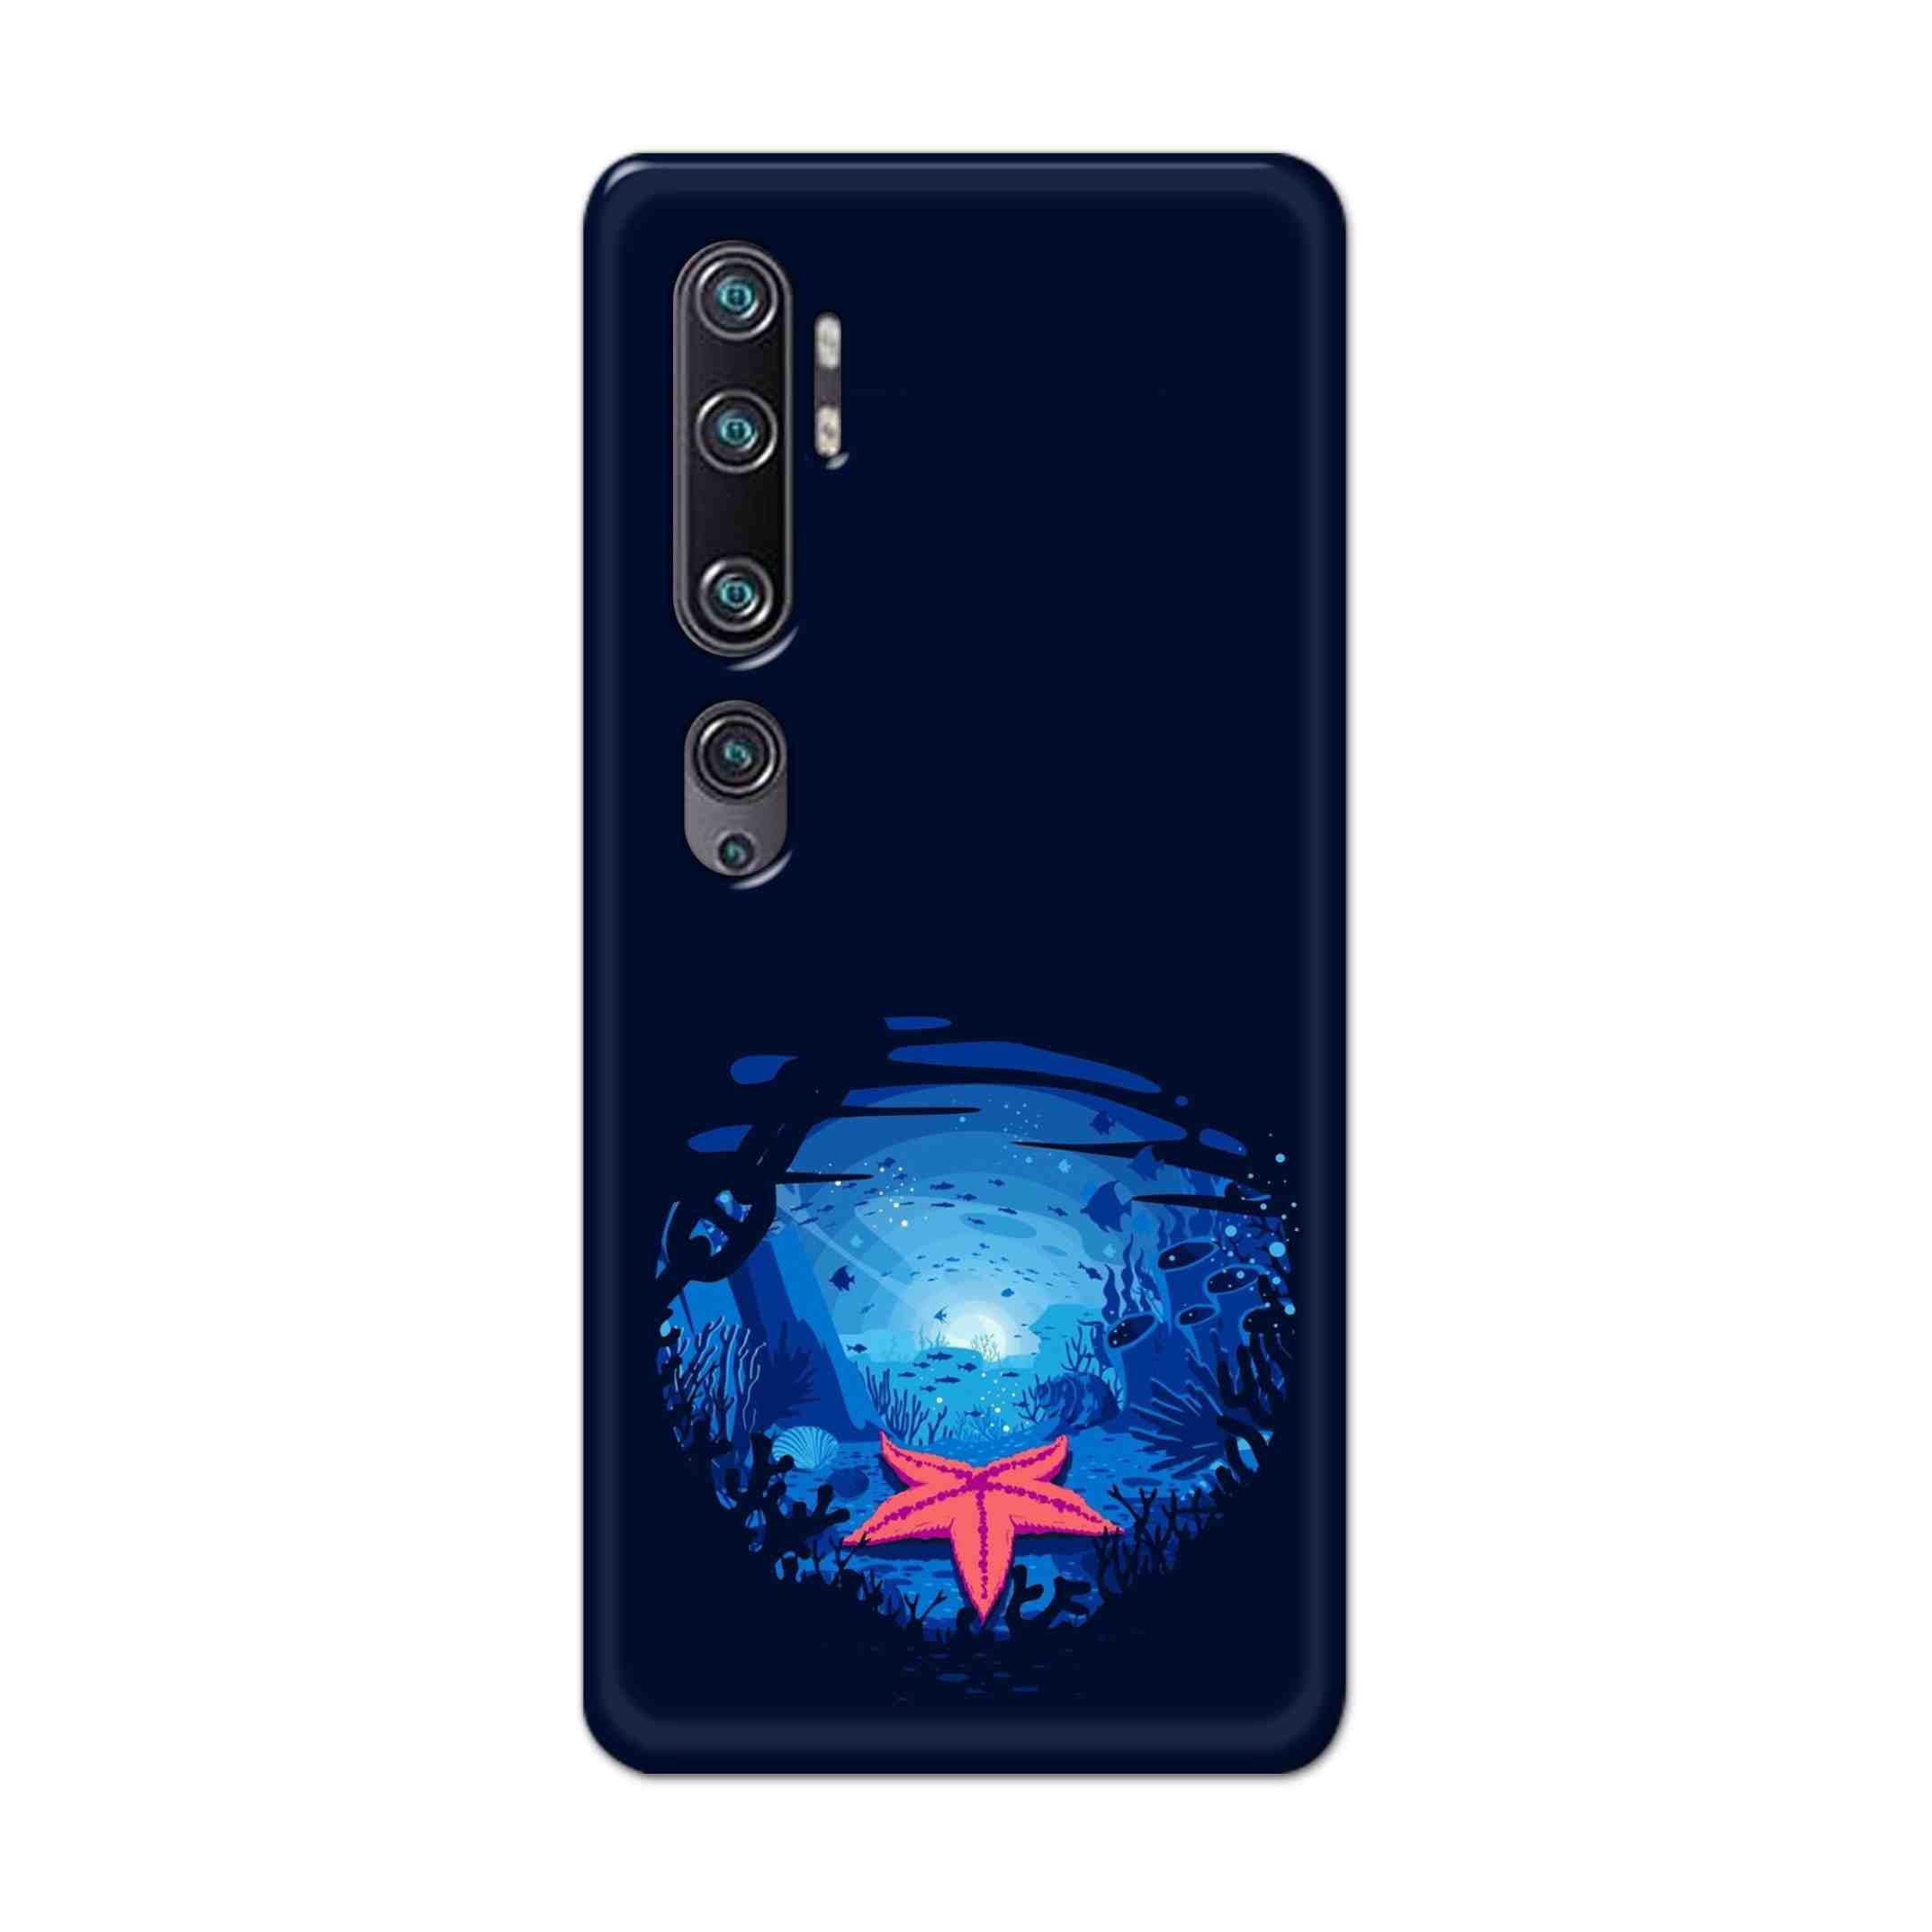 Buy Star Fresh Hard Back Mobile Phone Case Cover For Xiaomi Mi Note 10 Pro Online